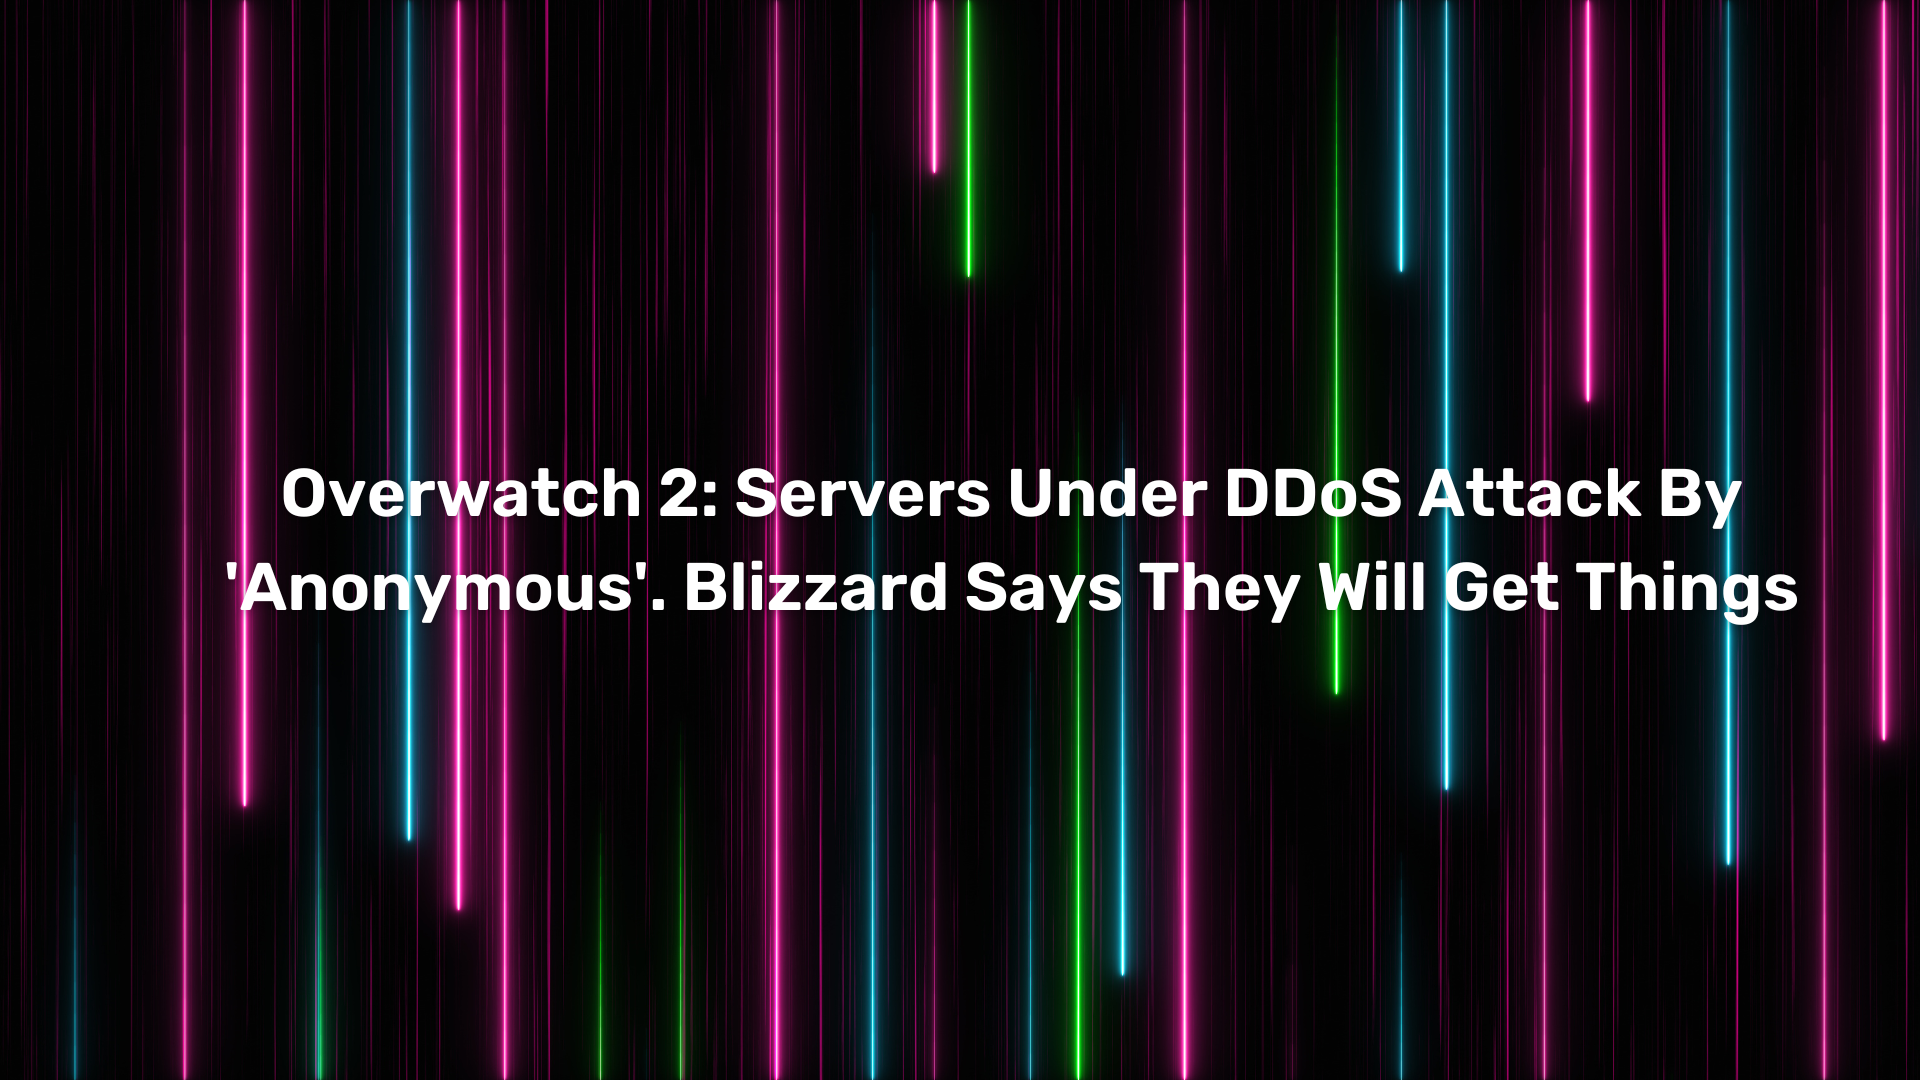 Overwatch 2 Servers Under DDoS Attack By 'Anonymous'. Blizzard Says They Will Get Things